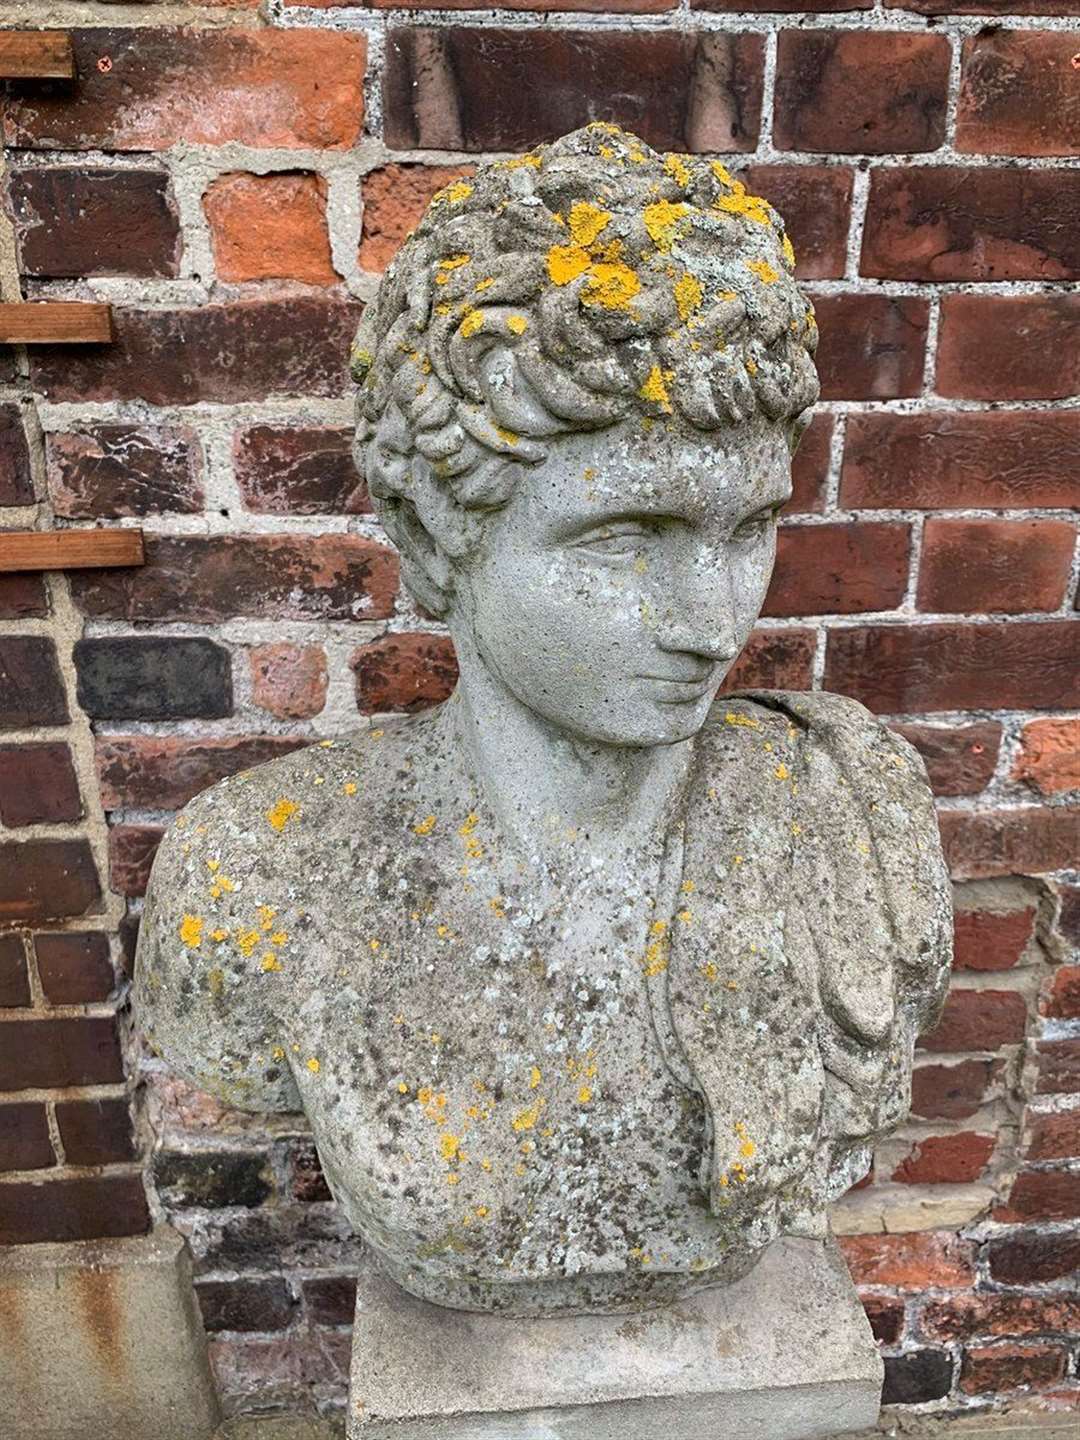 South Thanet MP Craig Mackinlay shared a photo of a bust of Claudius, asking if he should "tear him down"